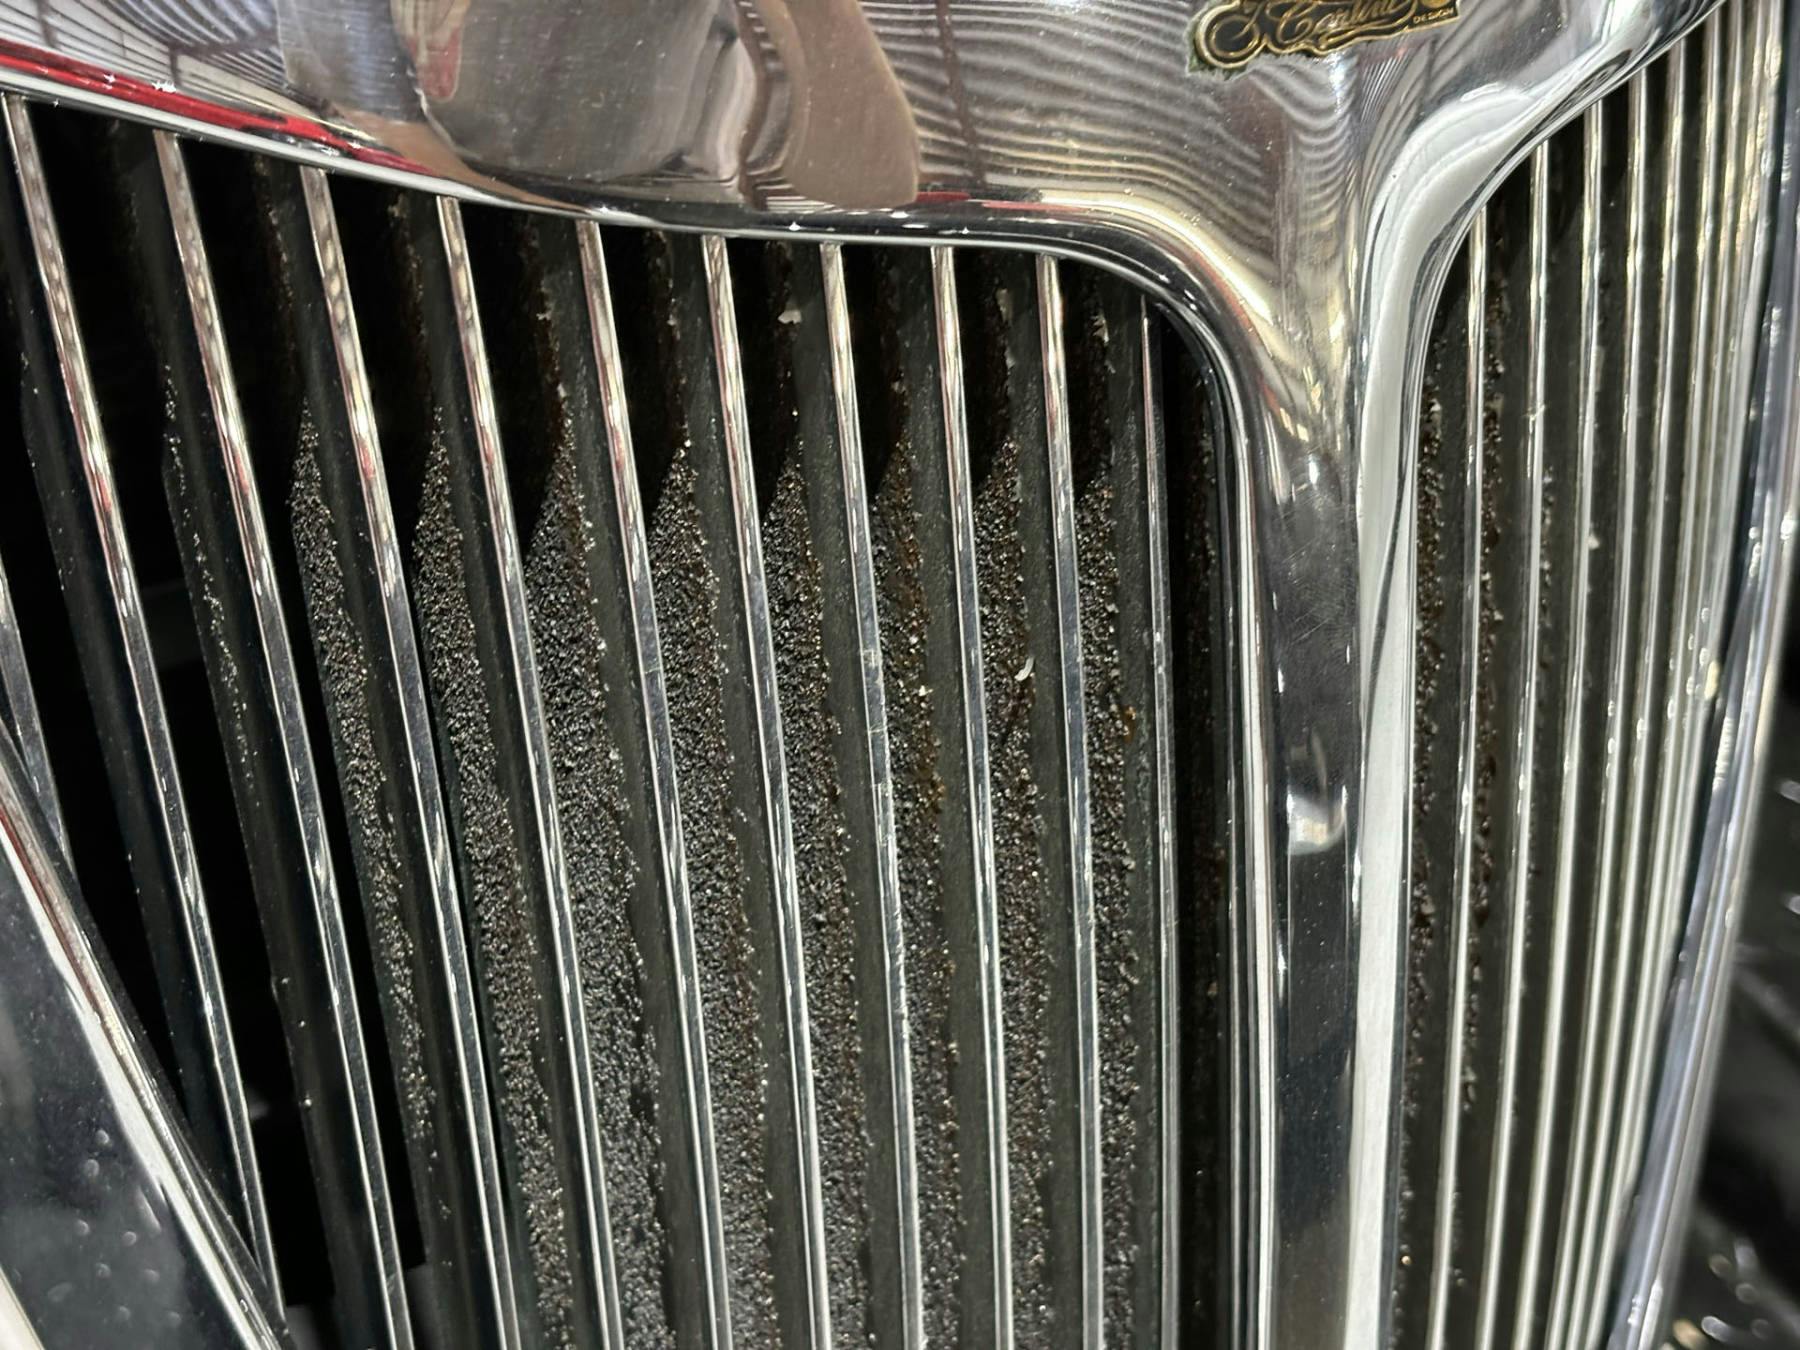 1999 Plymouth Prowler George Foreman exterior grille oxidization detail